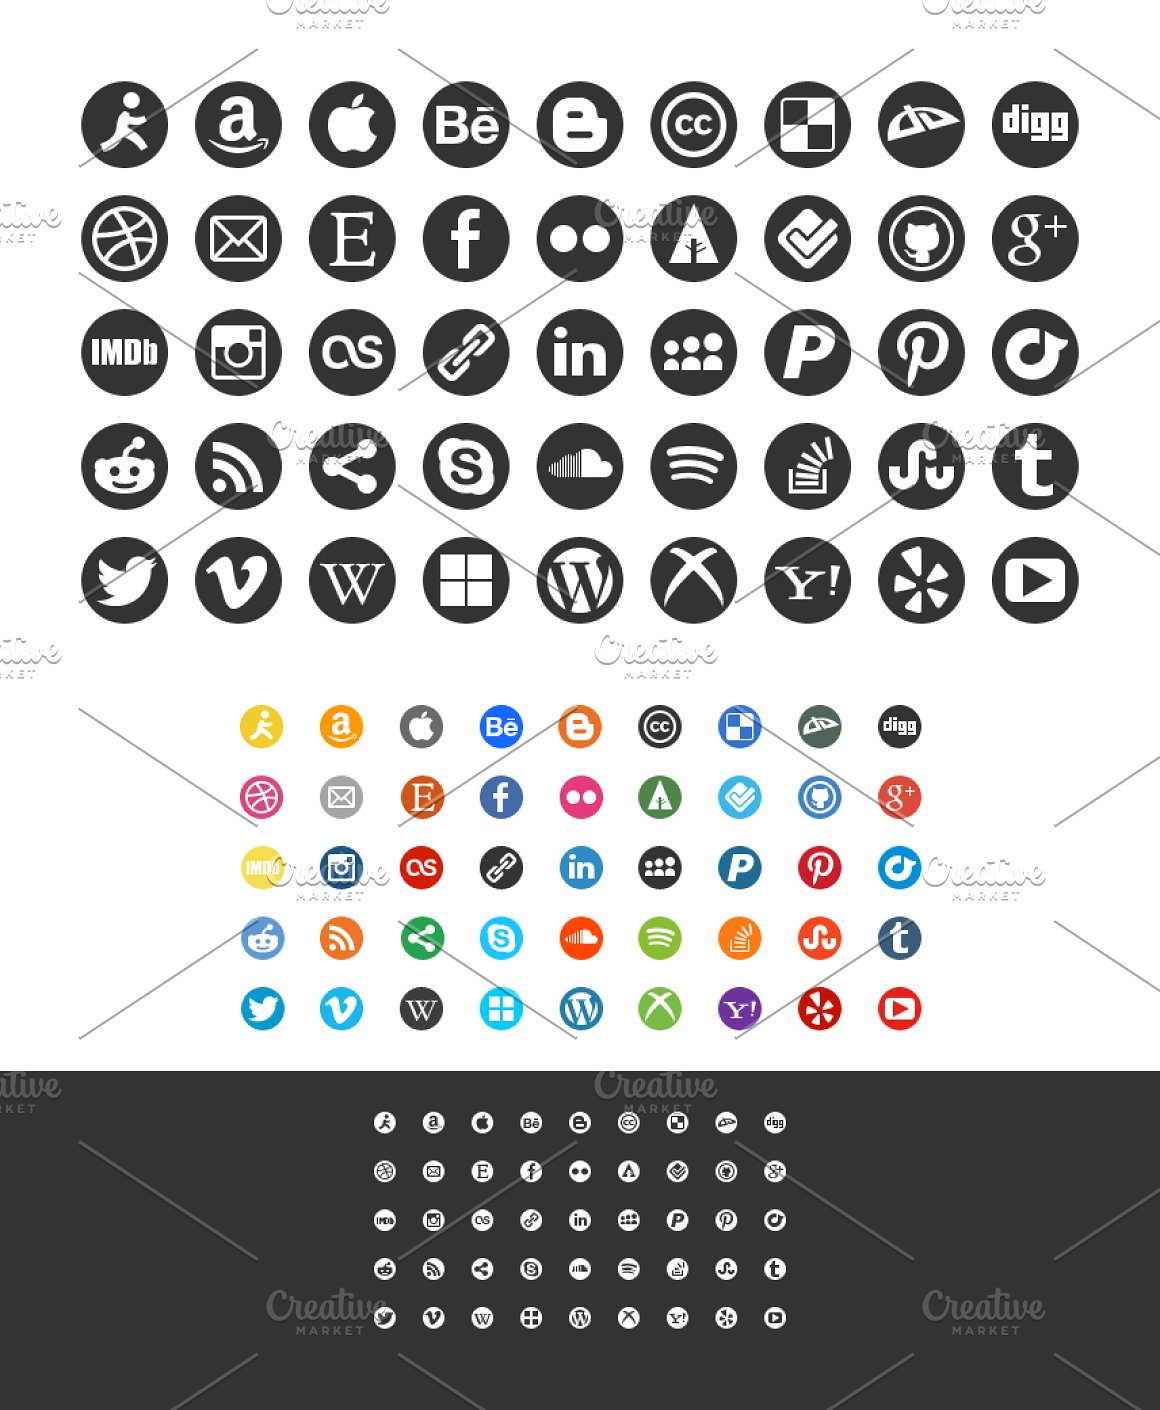 Here you will find bright and b/w icons.